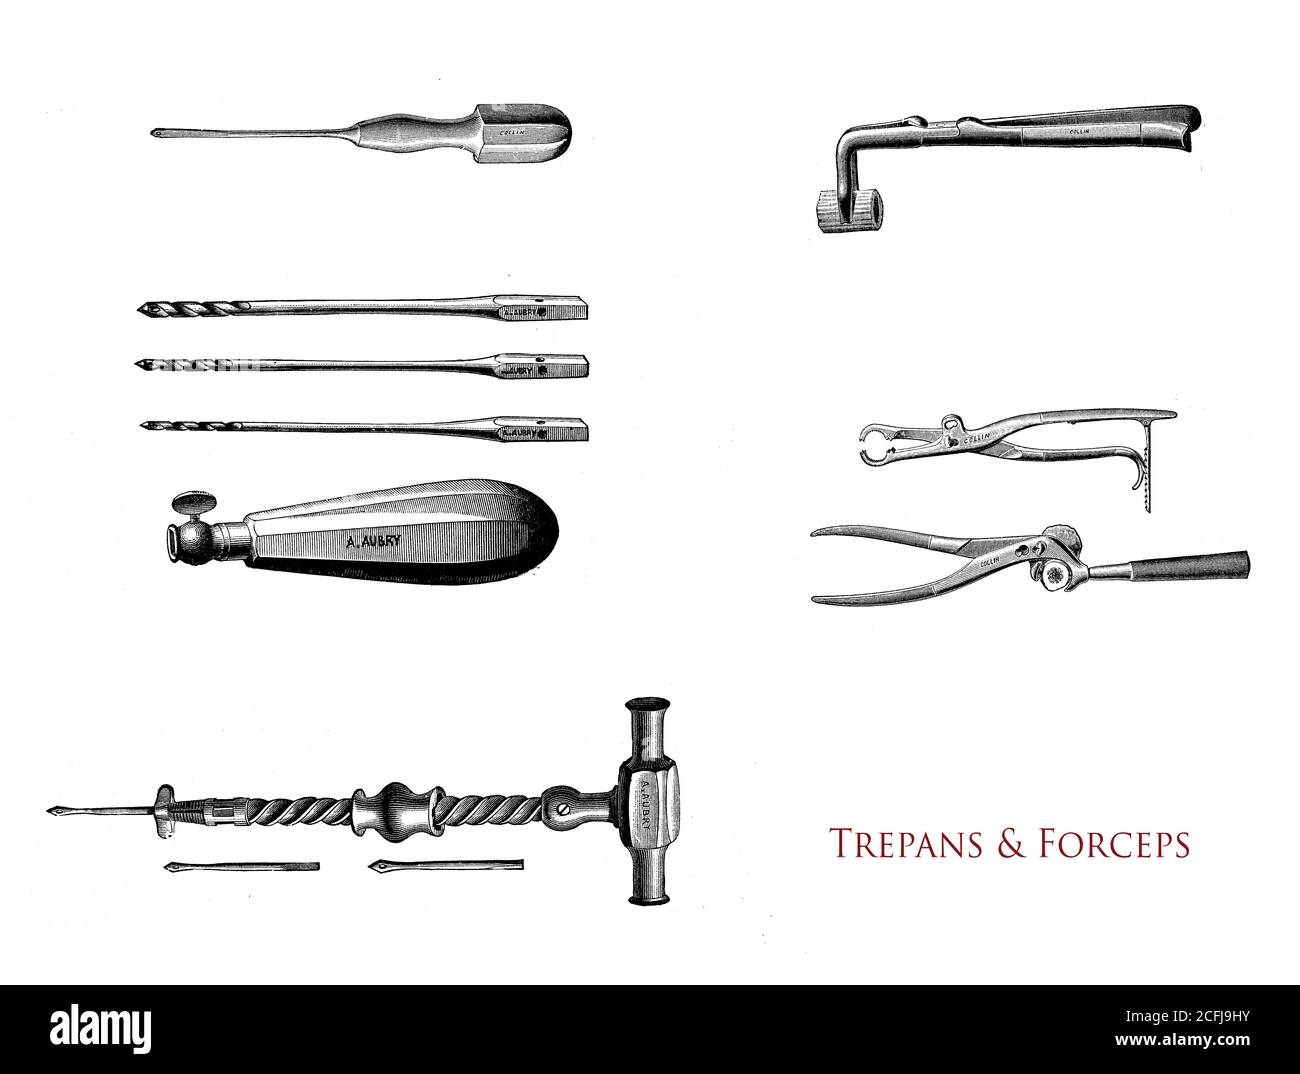 Healthcare and medicine - surgical tools: trepans and forceps Stock Photo